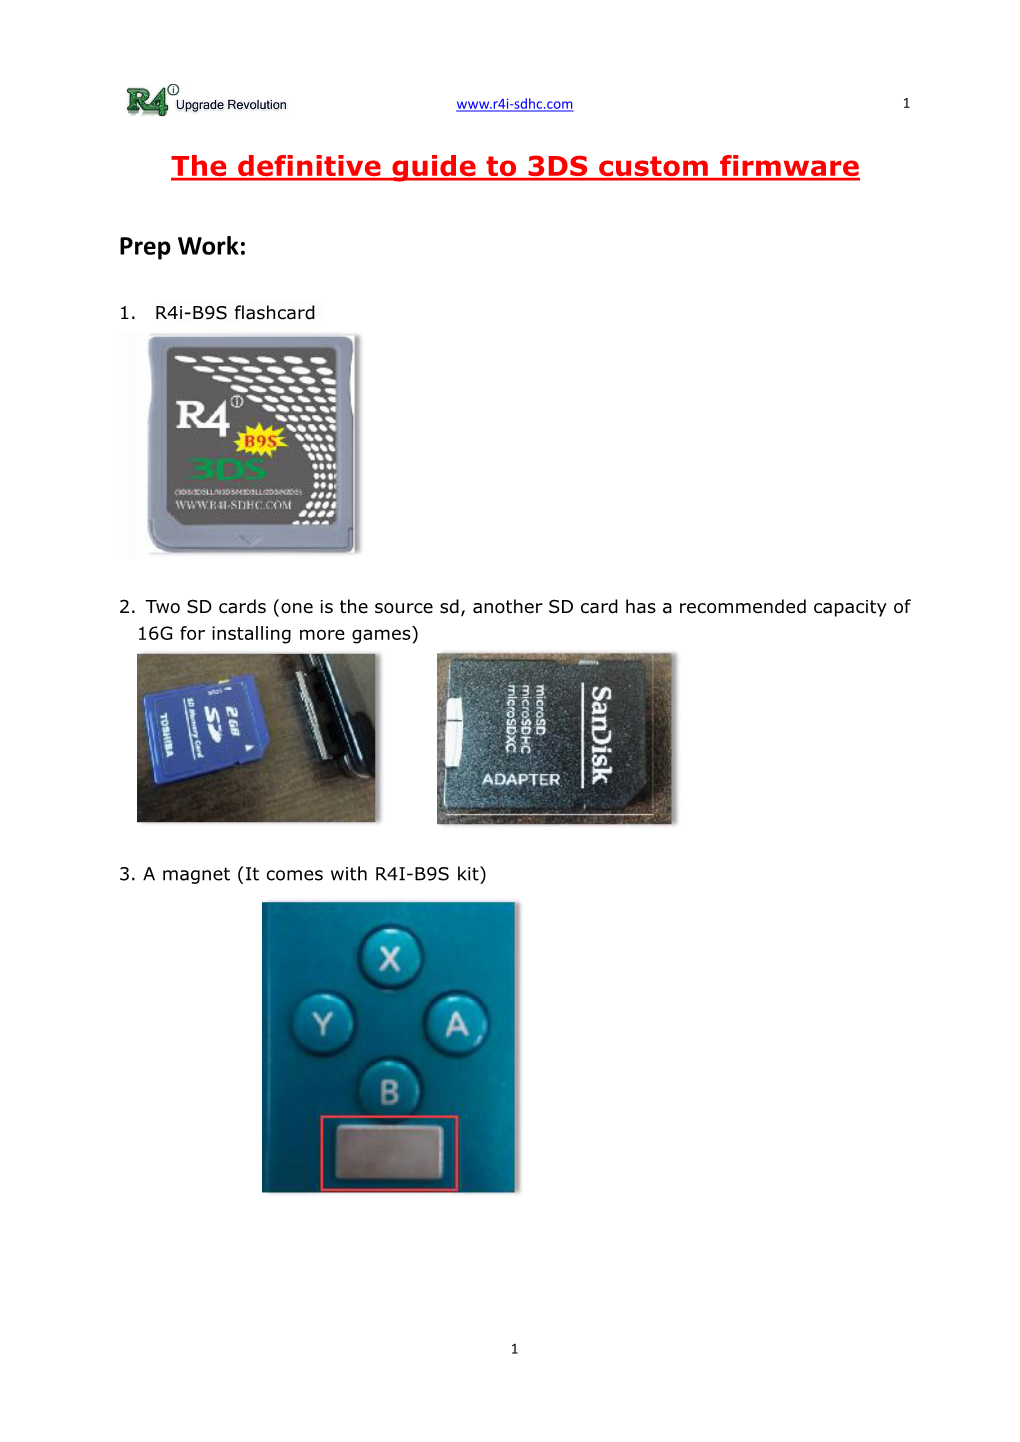 The Definitive Guide to 3DS Custom Firmware Prep Work